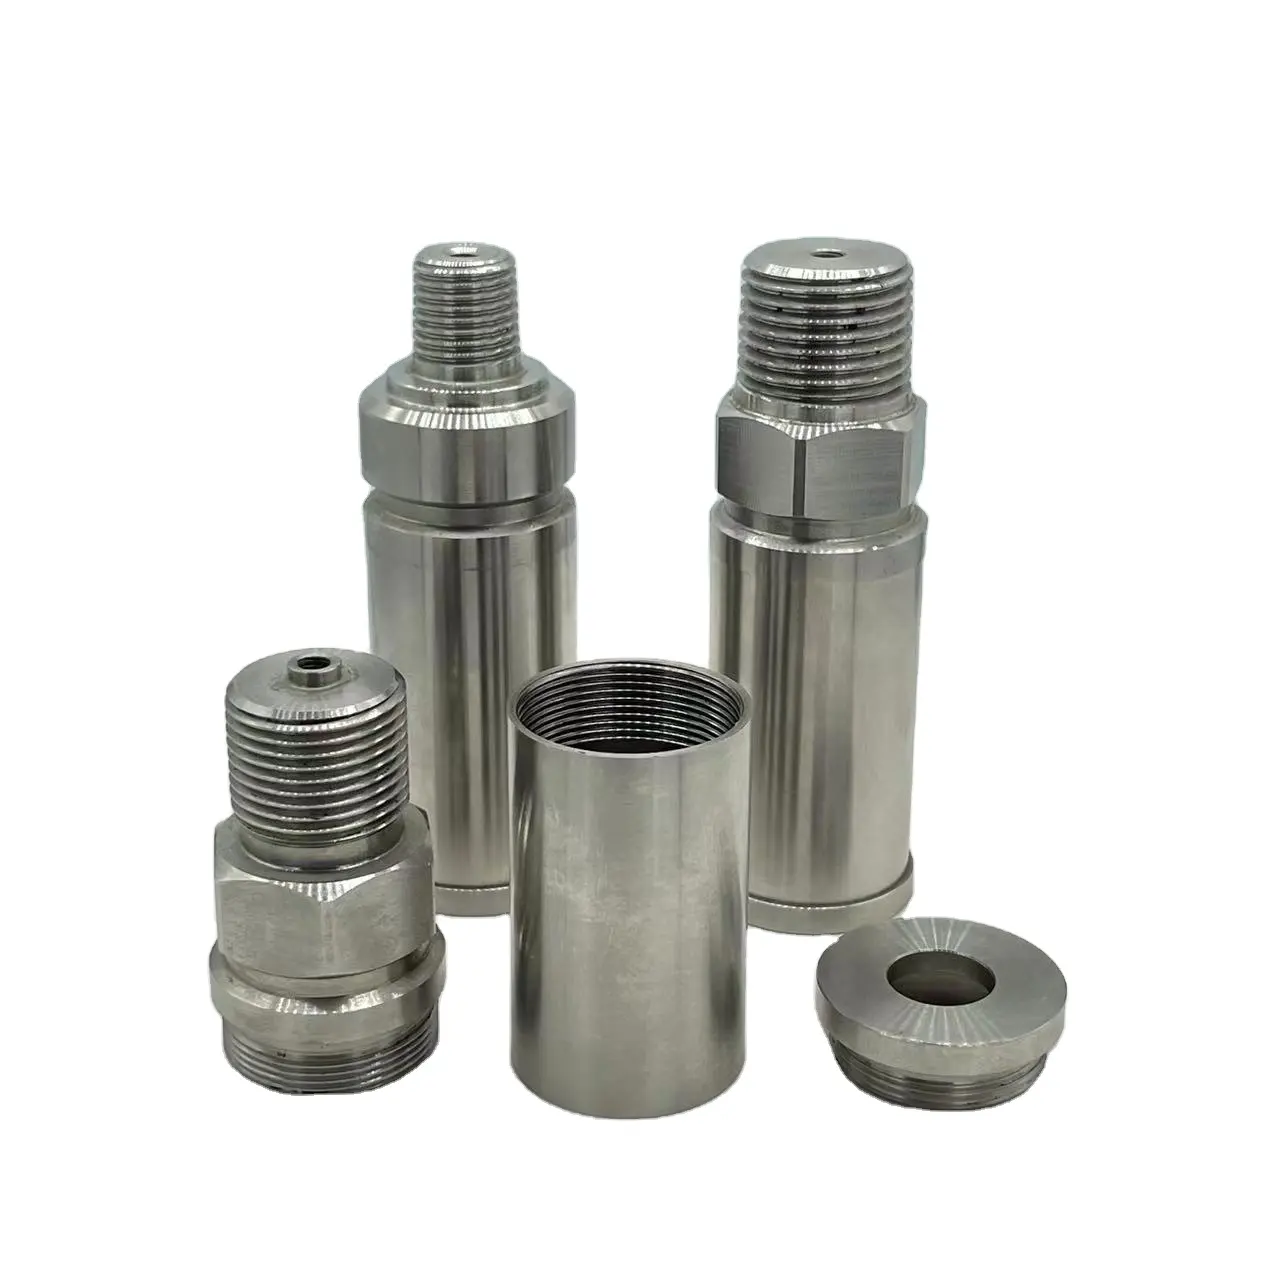 Security Electronics Stainless Steel Nuts Custom Aluminum Fasteners Factory Professional Custom Hardware Tools Supplies